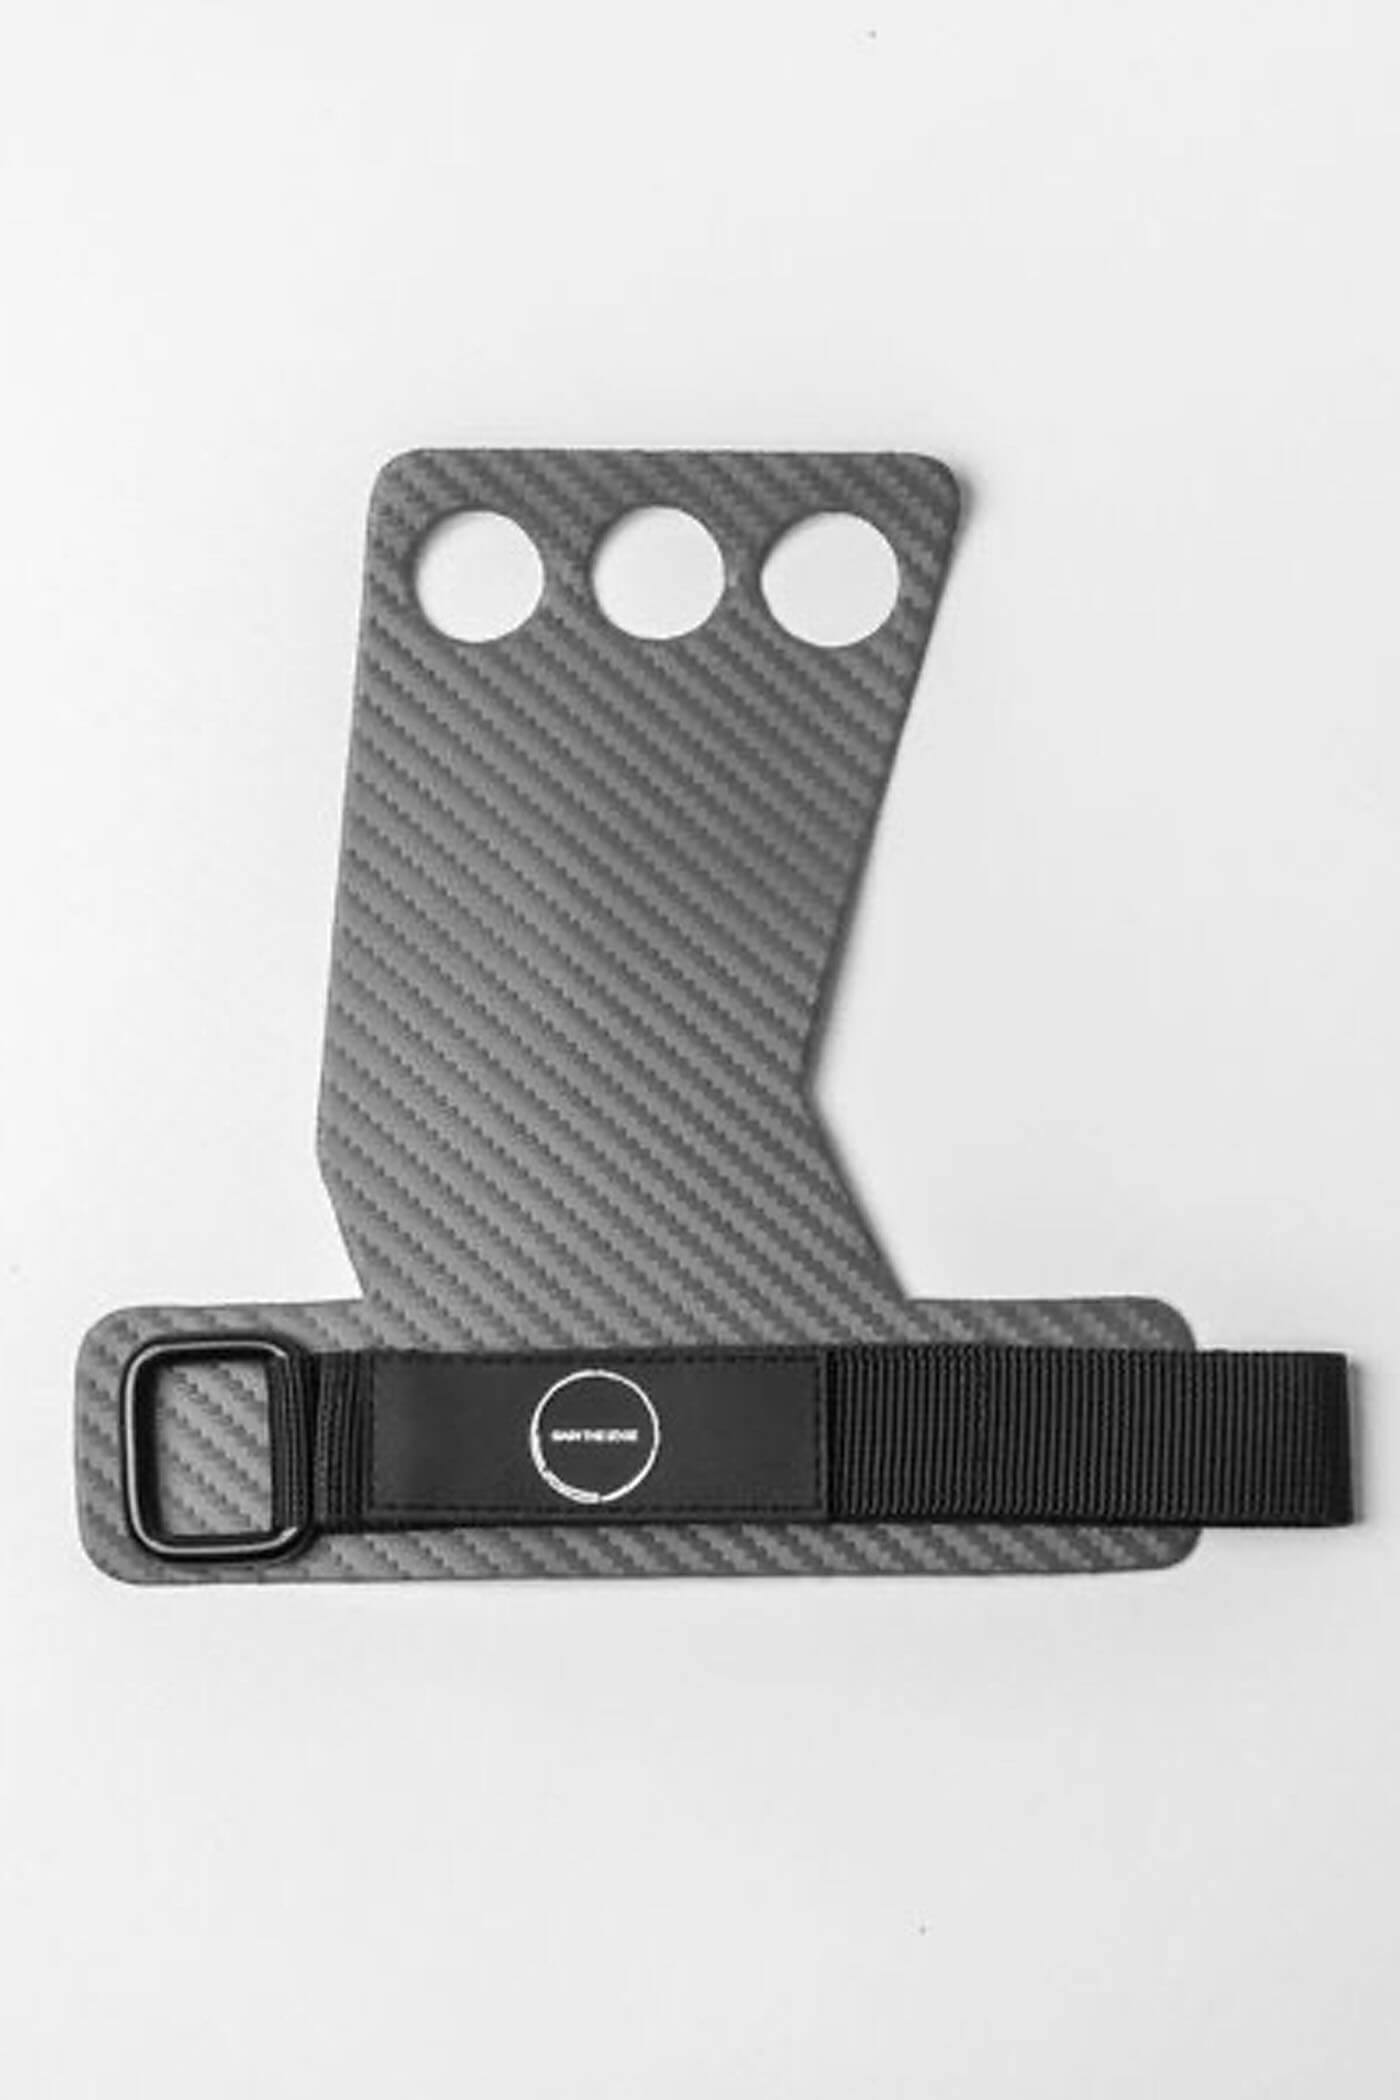 Hand Grips for Gym & Crossfit - Gain The Edge Official